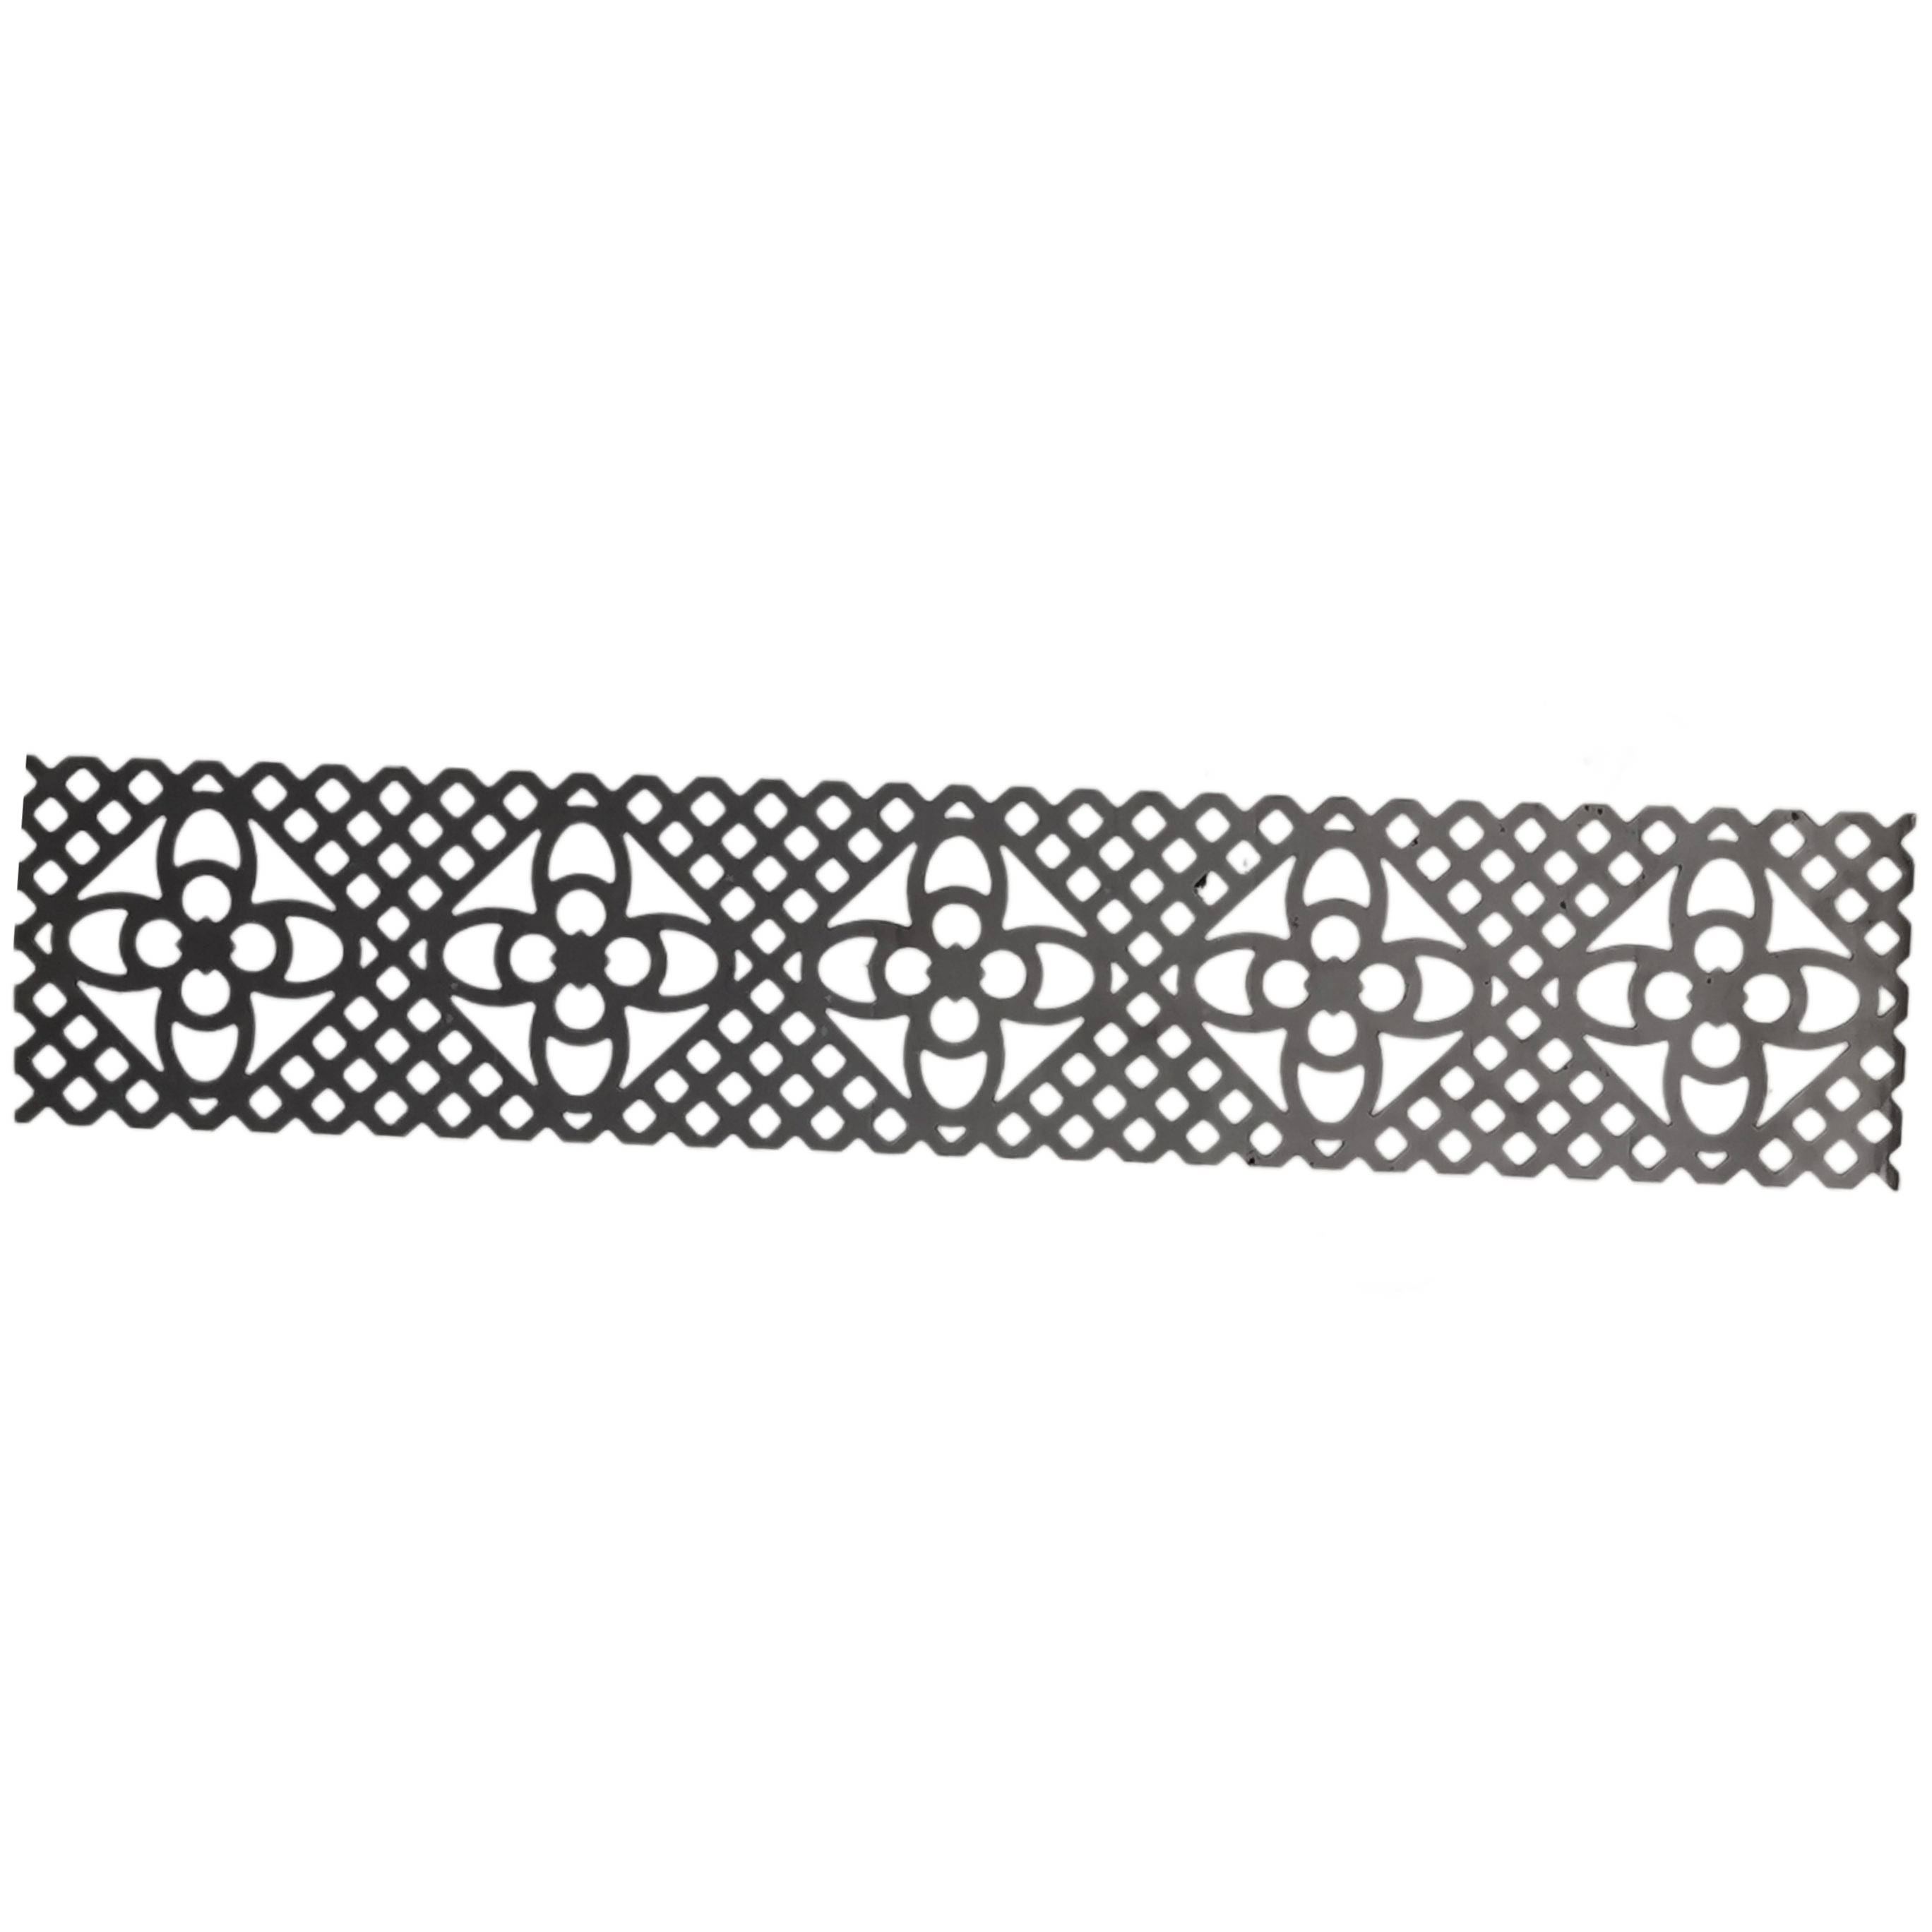 DECORATIVE WROUGHT IRON STAMPING/CODE:9088